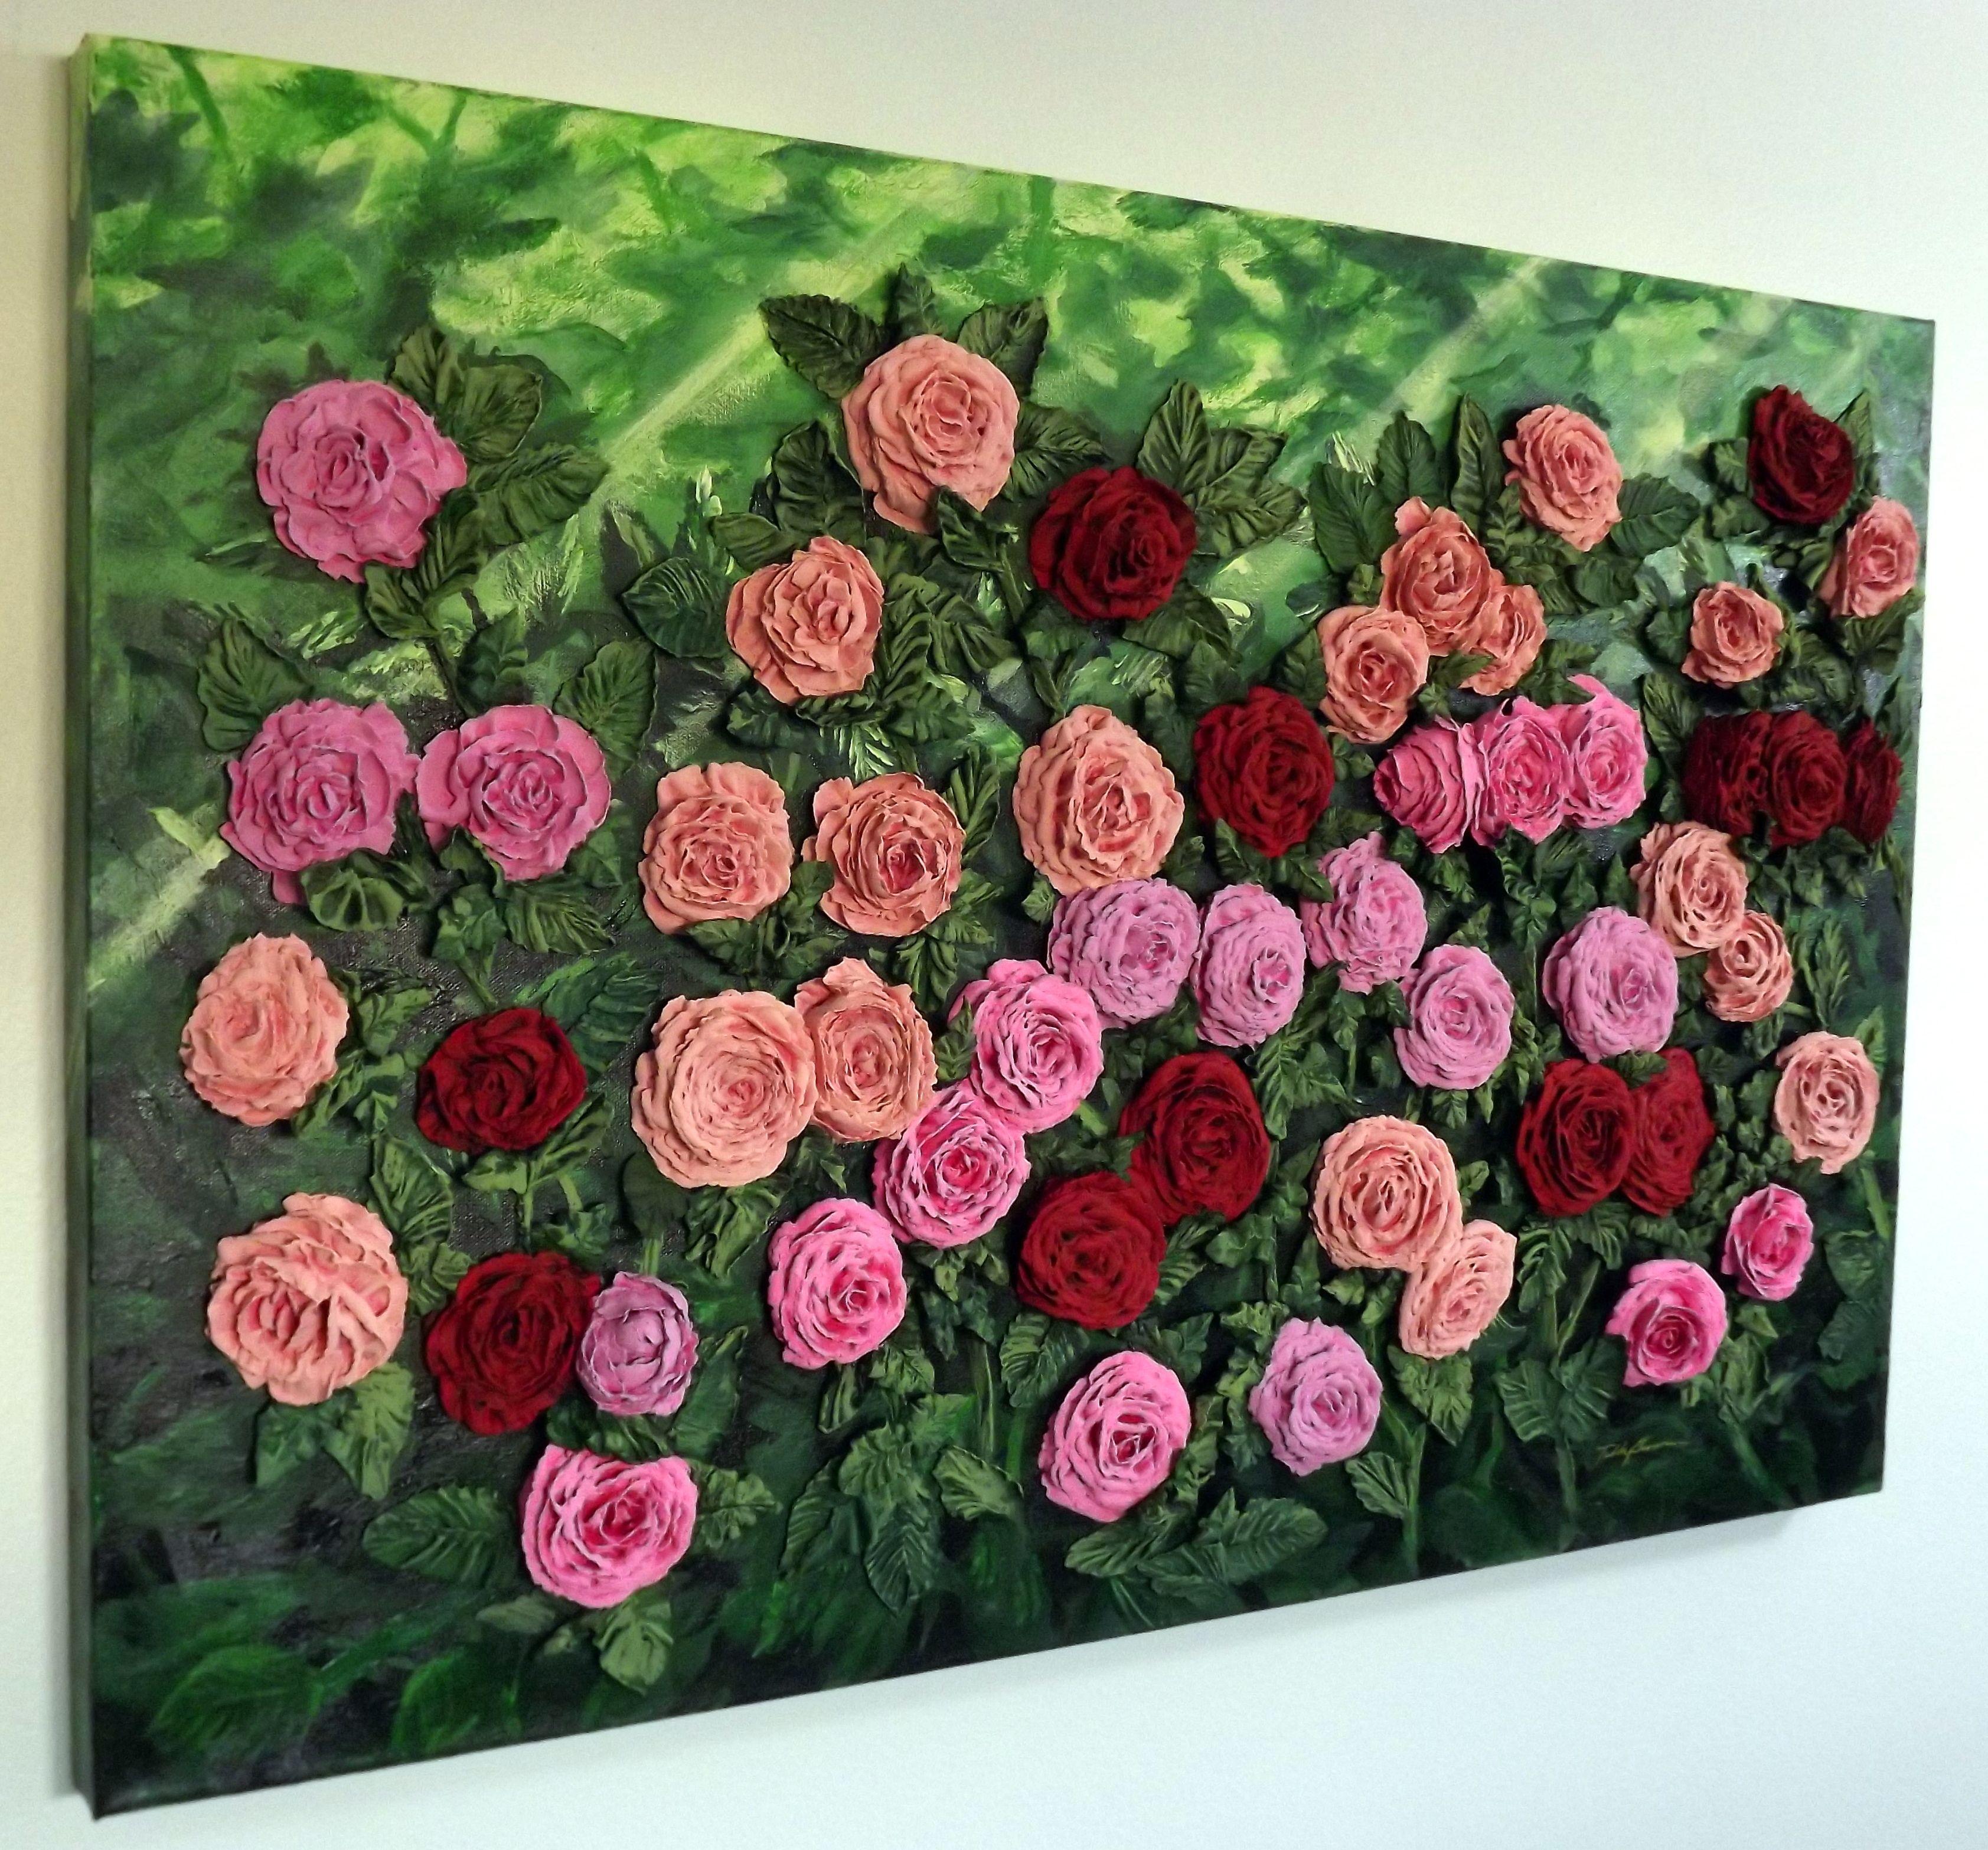 Wild Buttercream Roses, Mixed Media on Canvas - Pop Art Mixed Media Art by Teddy Brown